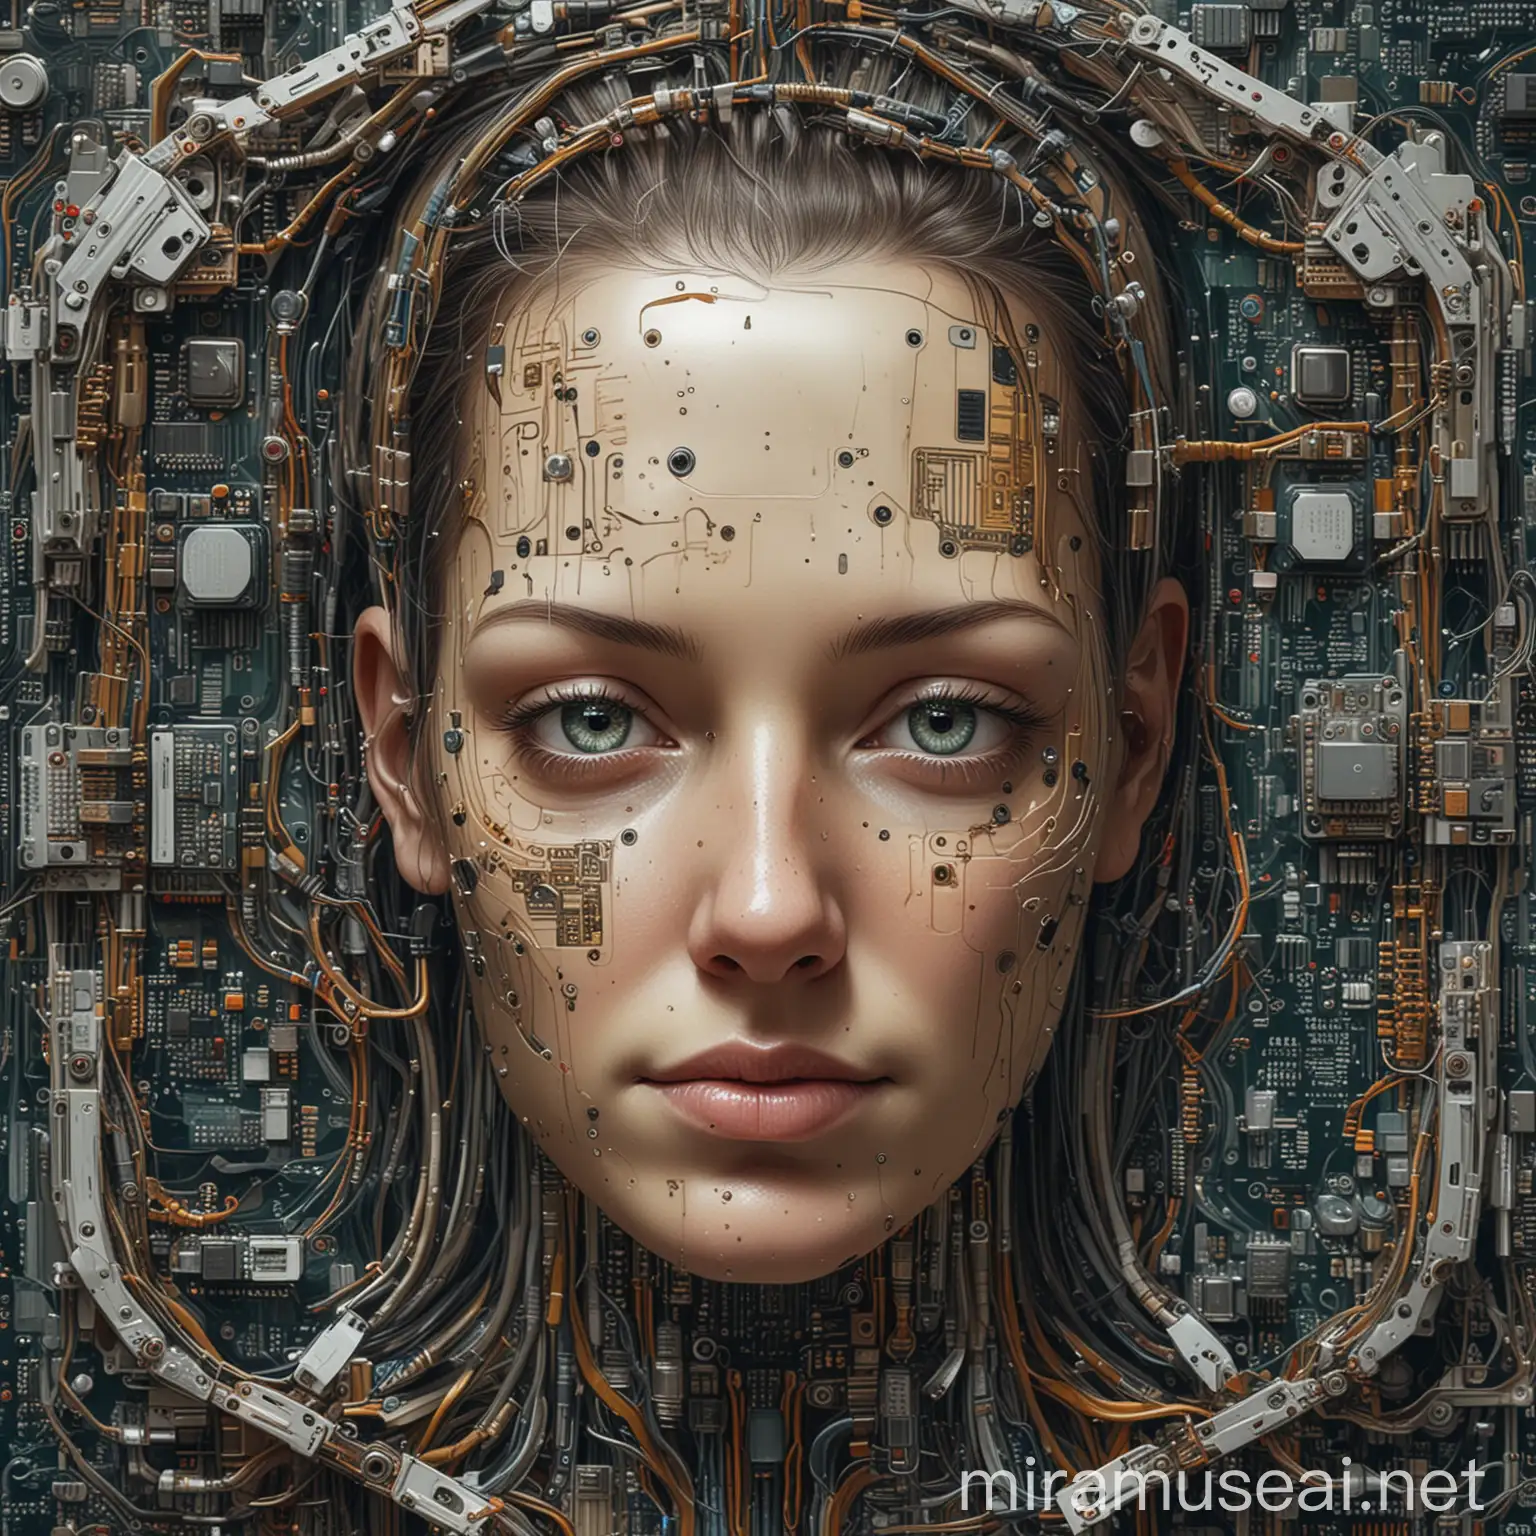 Highly detailed painting, wide view from above, an android with a human face which is half peeled off to reveal circuitry and electronics inside, use muted colors only, high quality